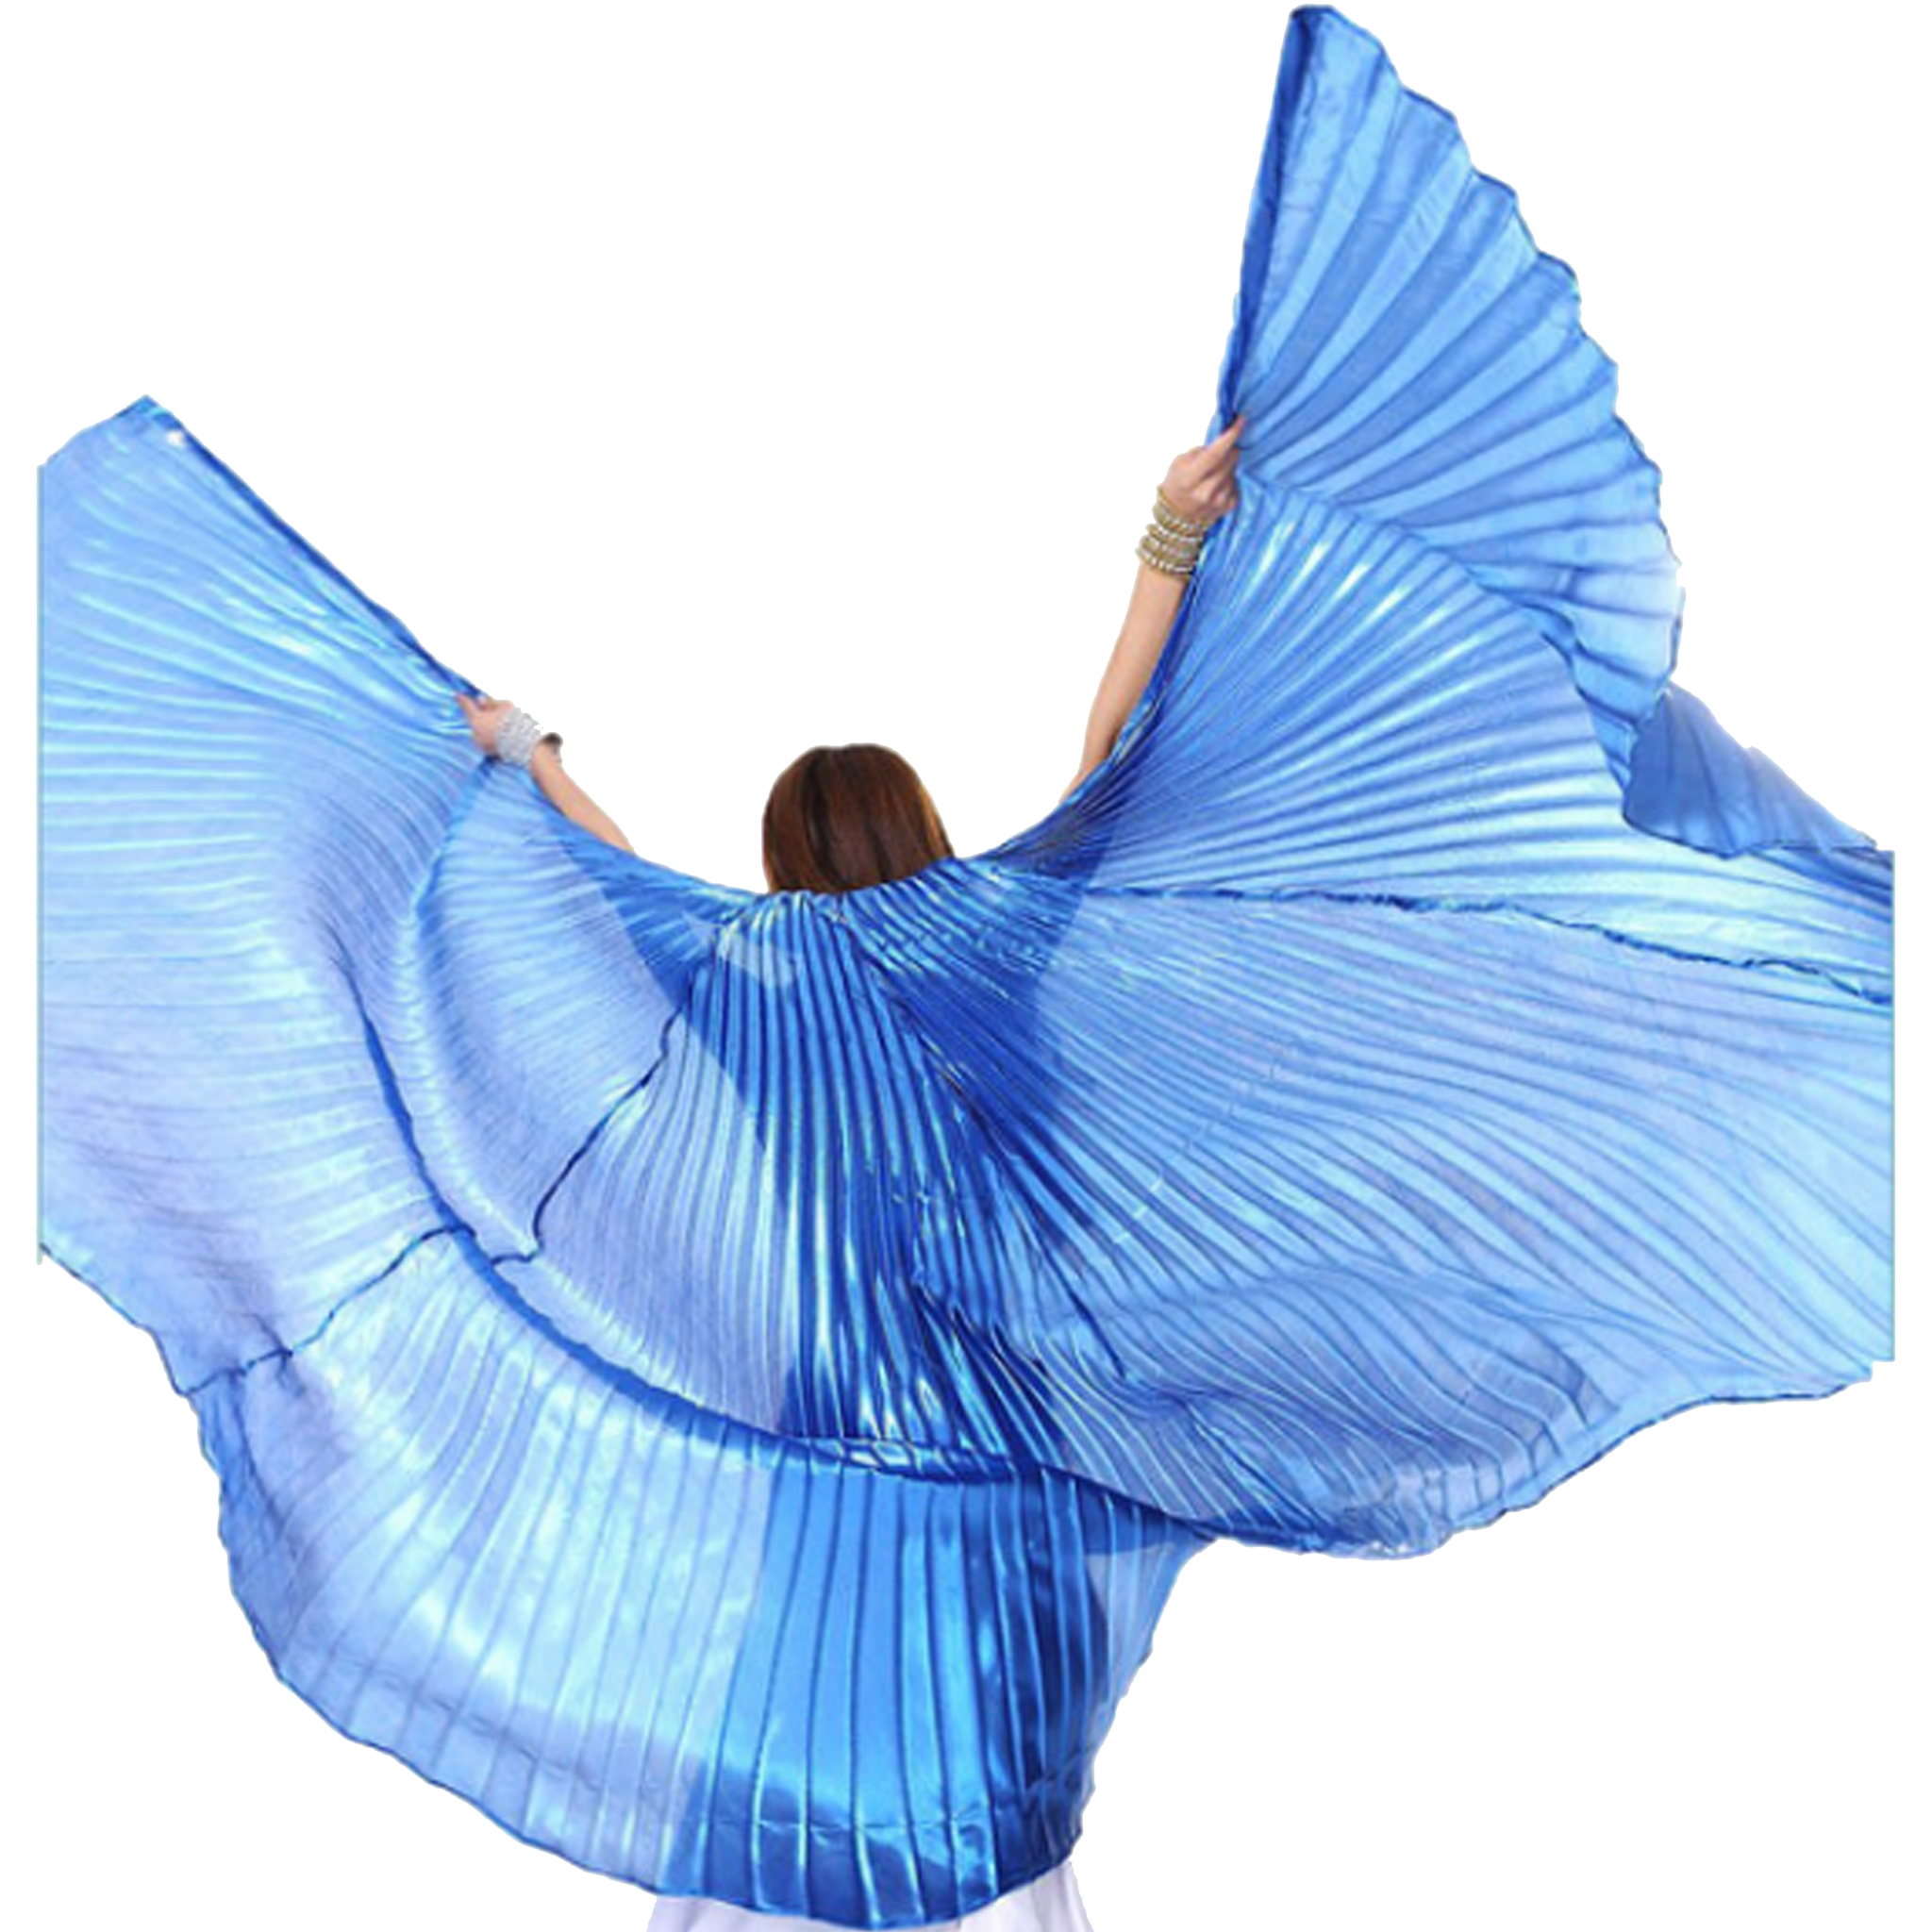 belly-dance-wings-with-stick-blue